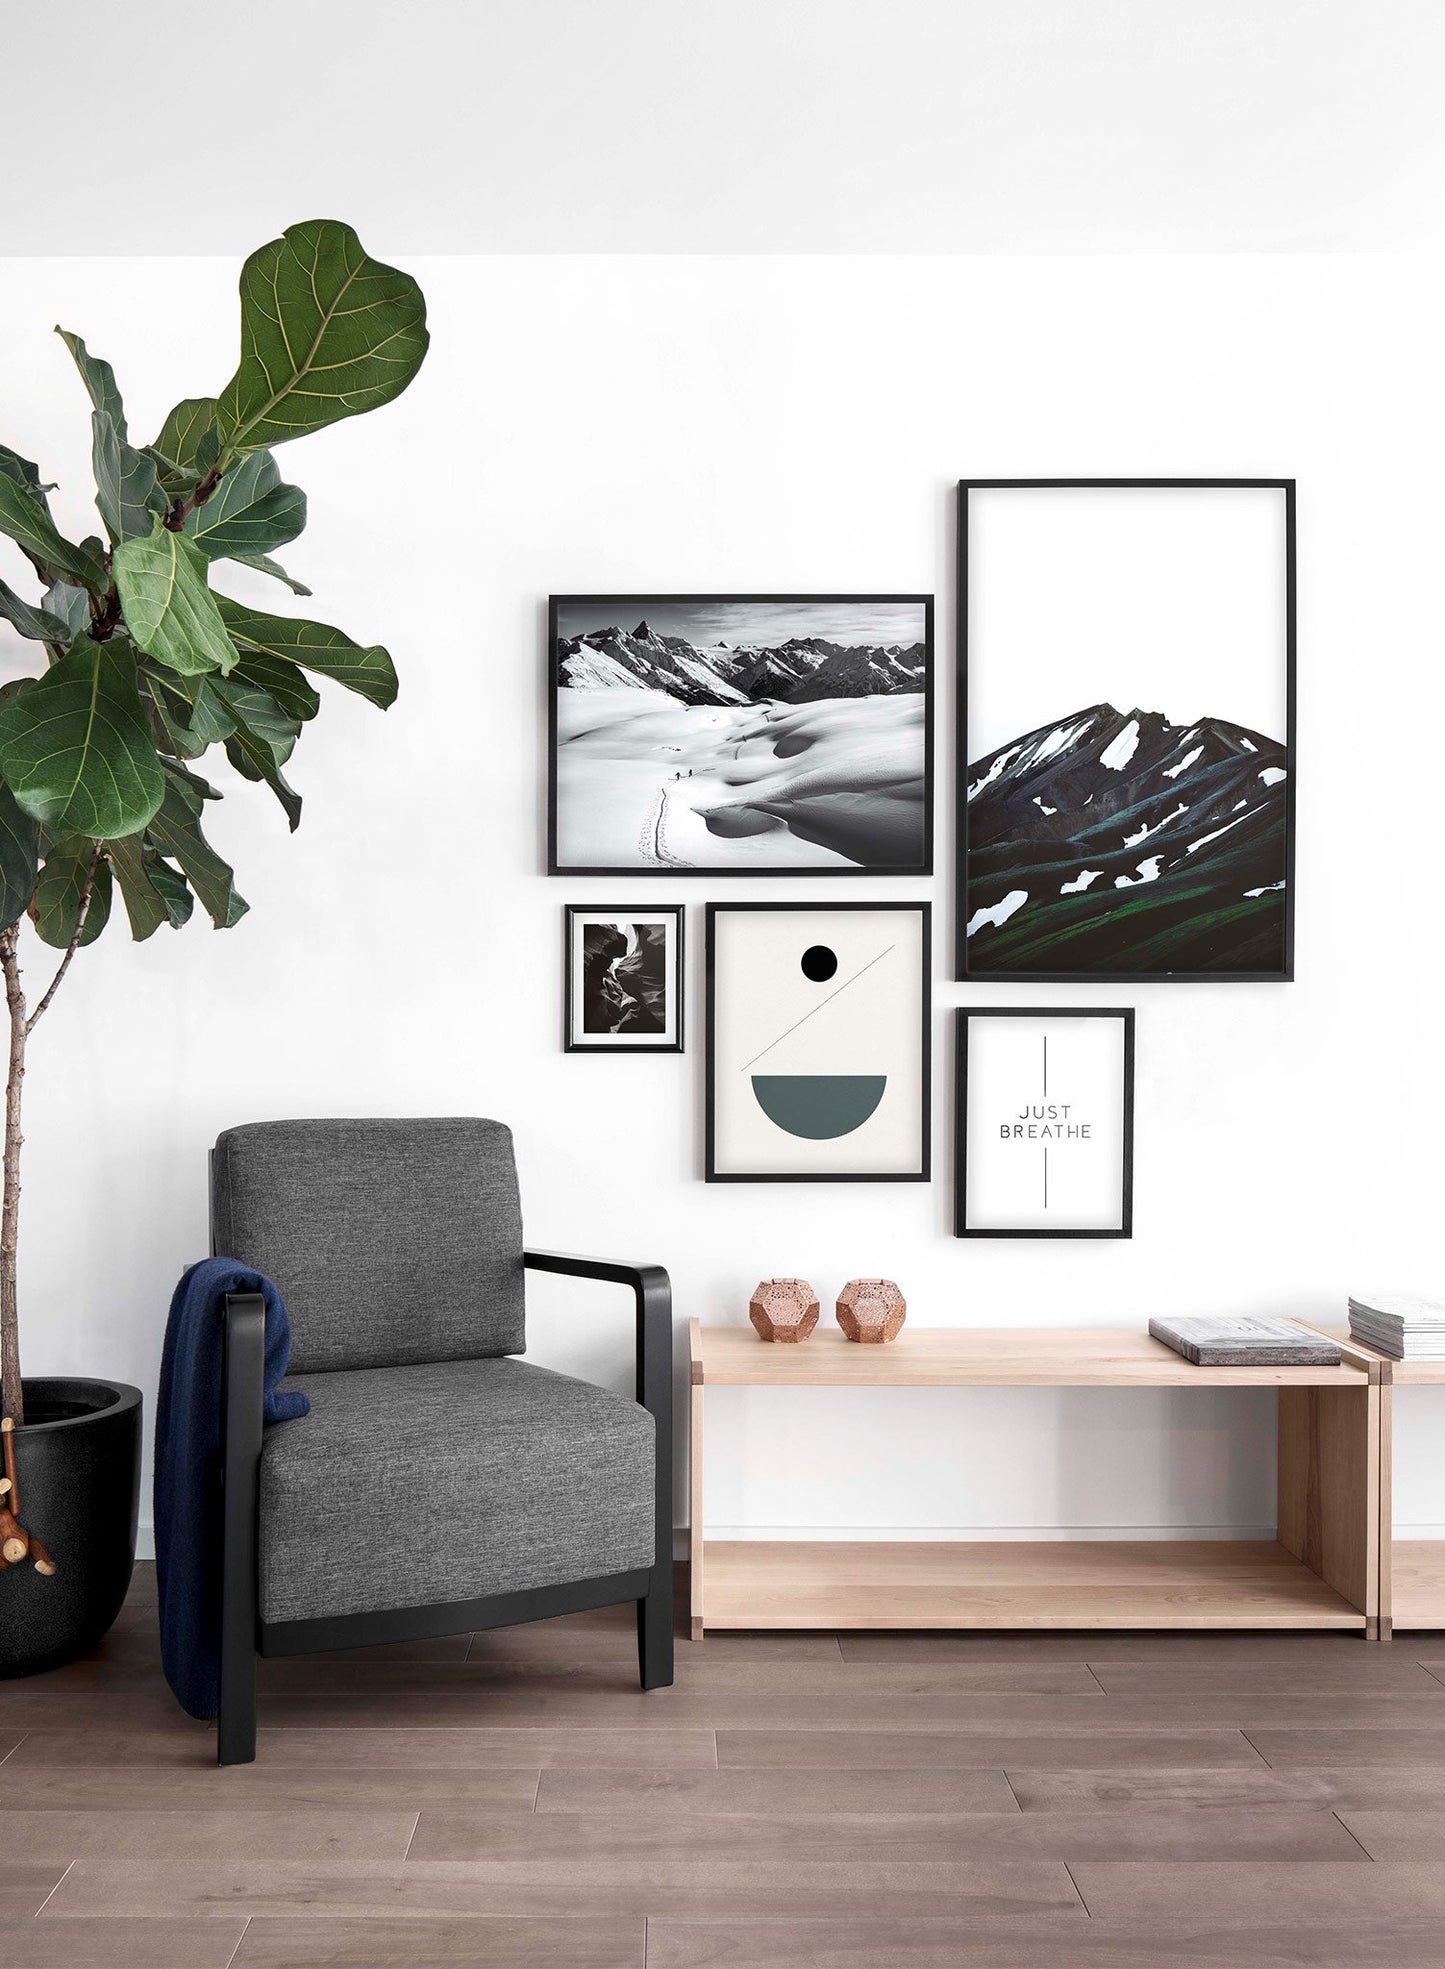 Landscape photography poster by Opposite Wall with white snow on mountain range - Lifestyle Gallery - Living Room